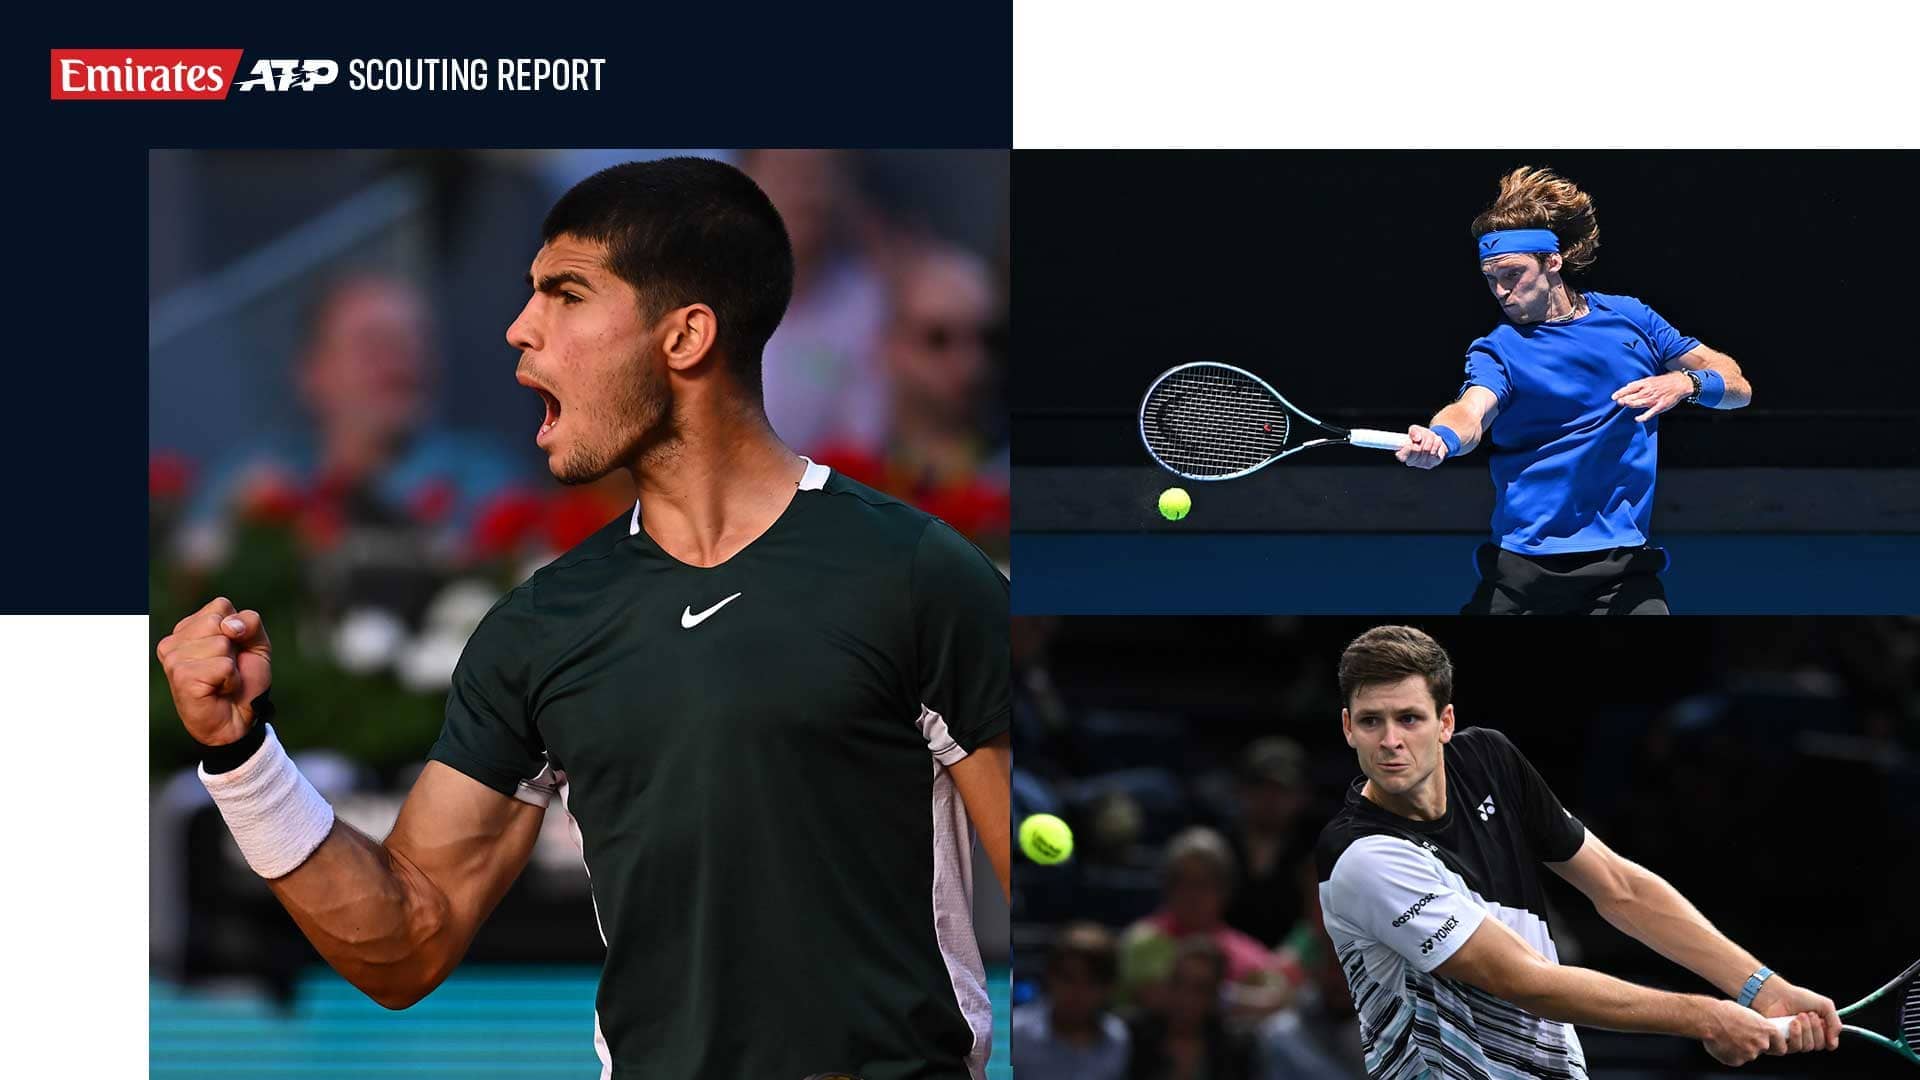 Carlos Alcaraz, Andrey Rublev and Hubert Hurkacz play as top seeds this week on the ATP Tour.